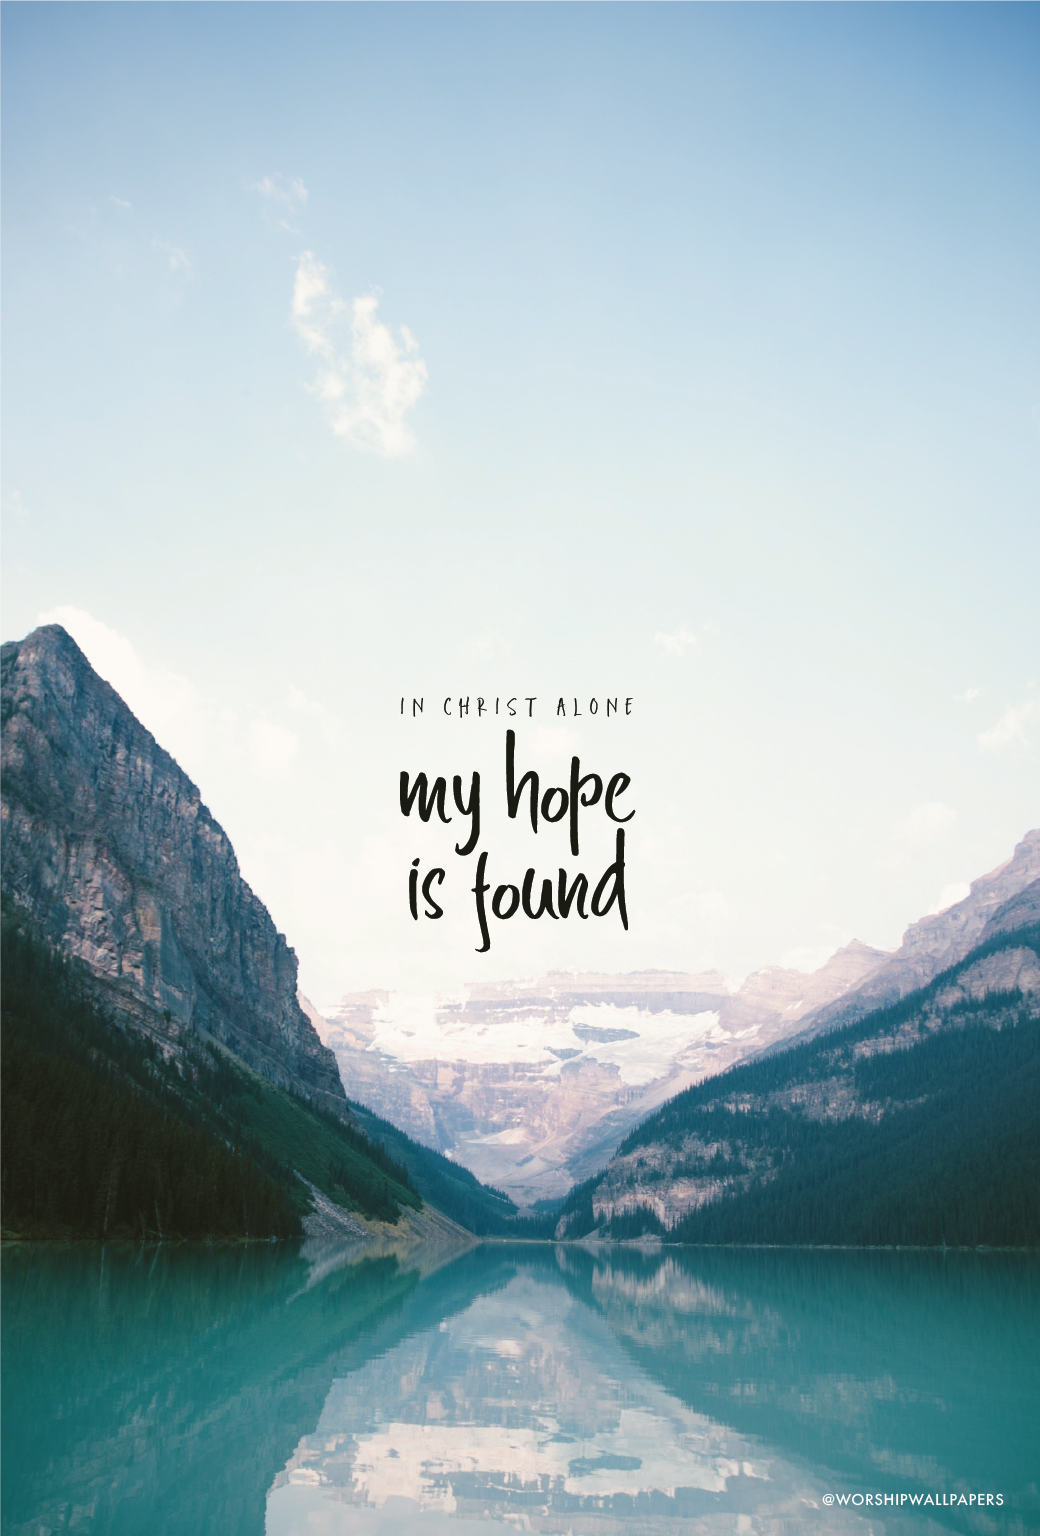 In Christ Alone // Owl City  WORSHIP WALLPAPERS